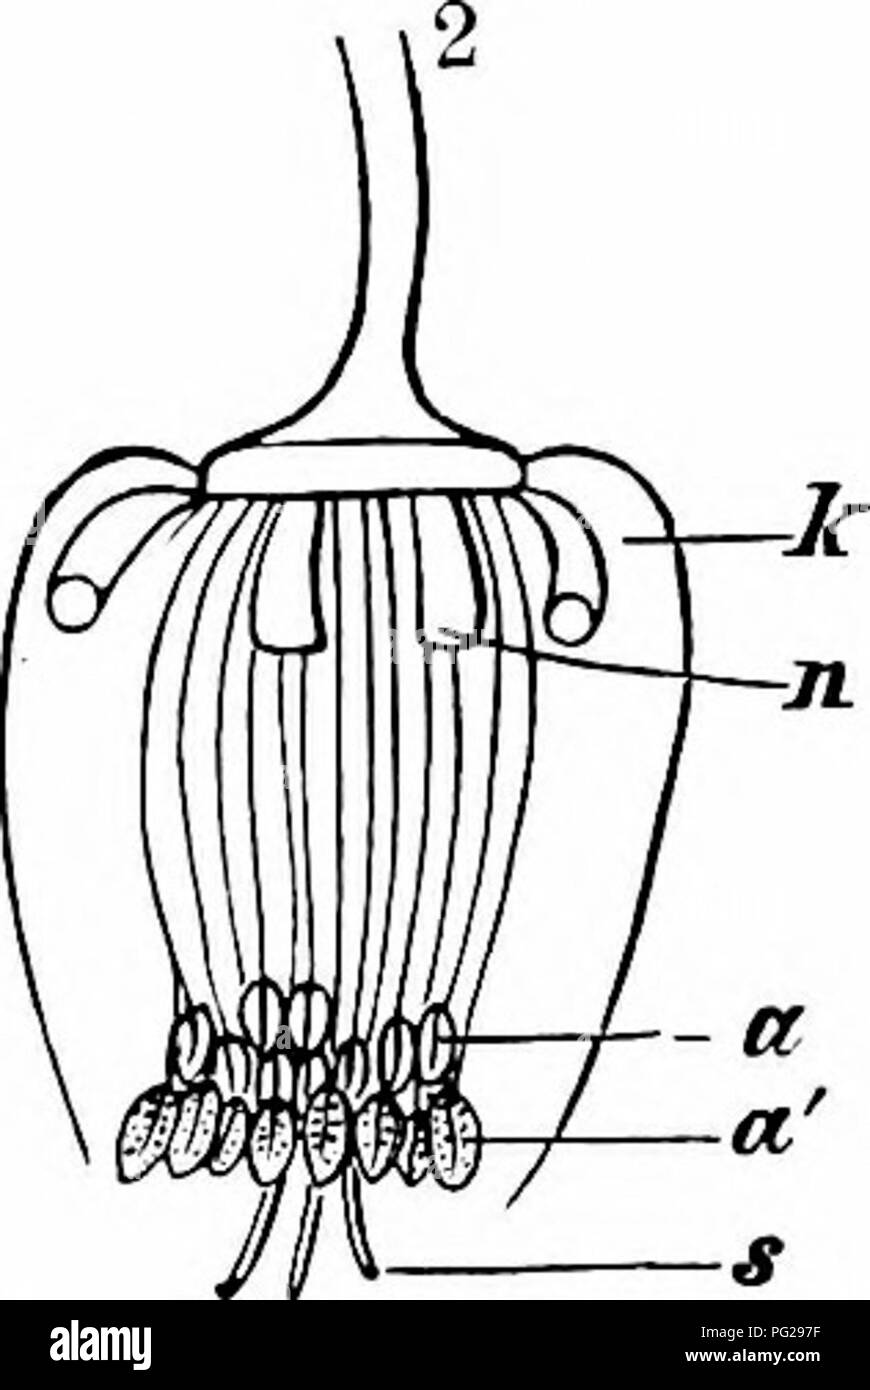 Handbook Of Flower Pollination Based Upon Hermann Mu Ller S Work The Fertilisation Of Flowers By Insects Fertilization Of Plants Fig 12 Hilleborus Foctidus L From Nature Half Schematic I Flower